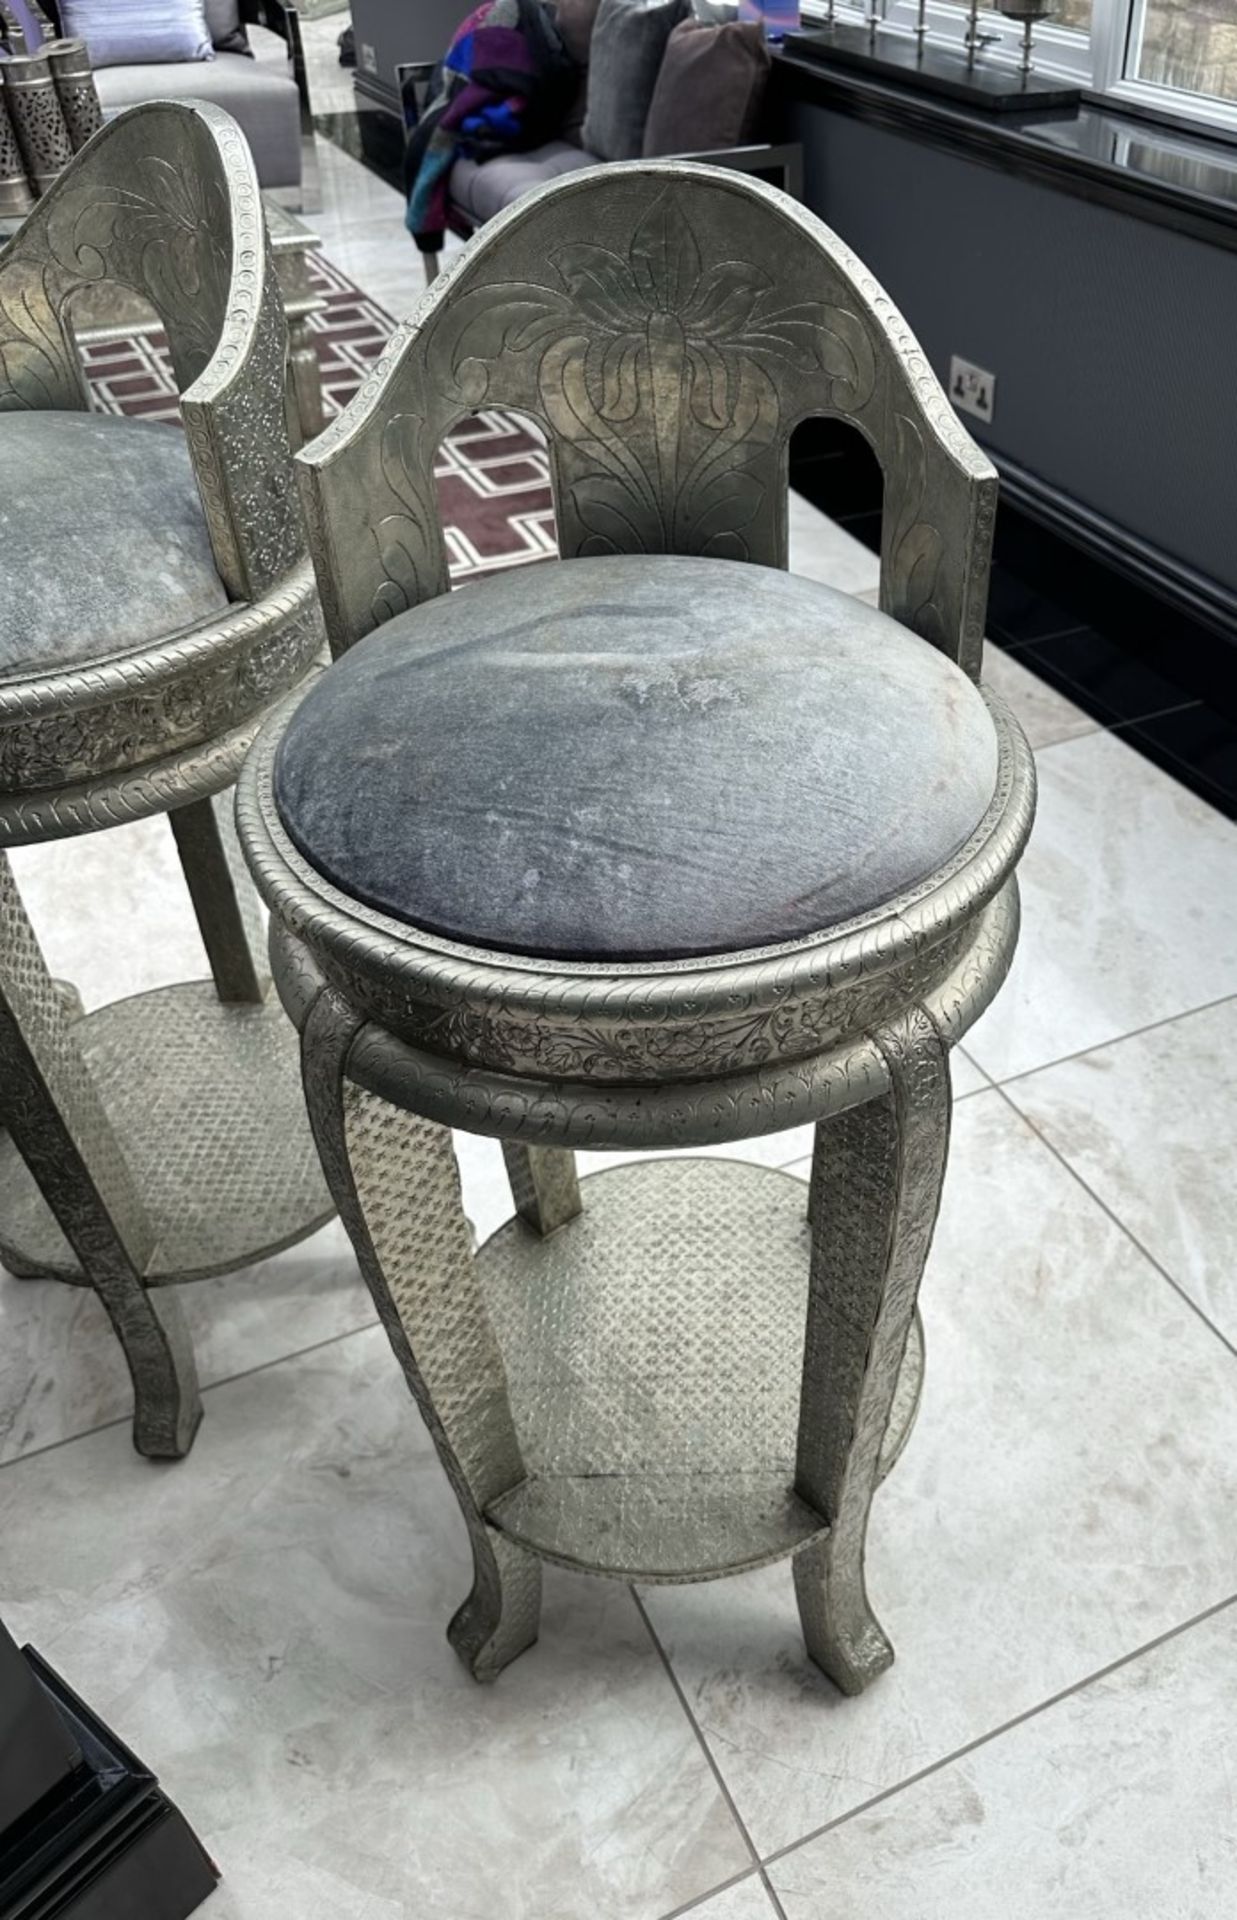 6 x Ornate Silver Tone Bar Stools With Grey Velvet Seat Pads - Image 2 of 16